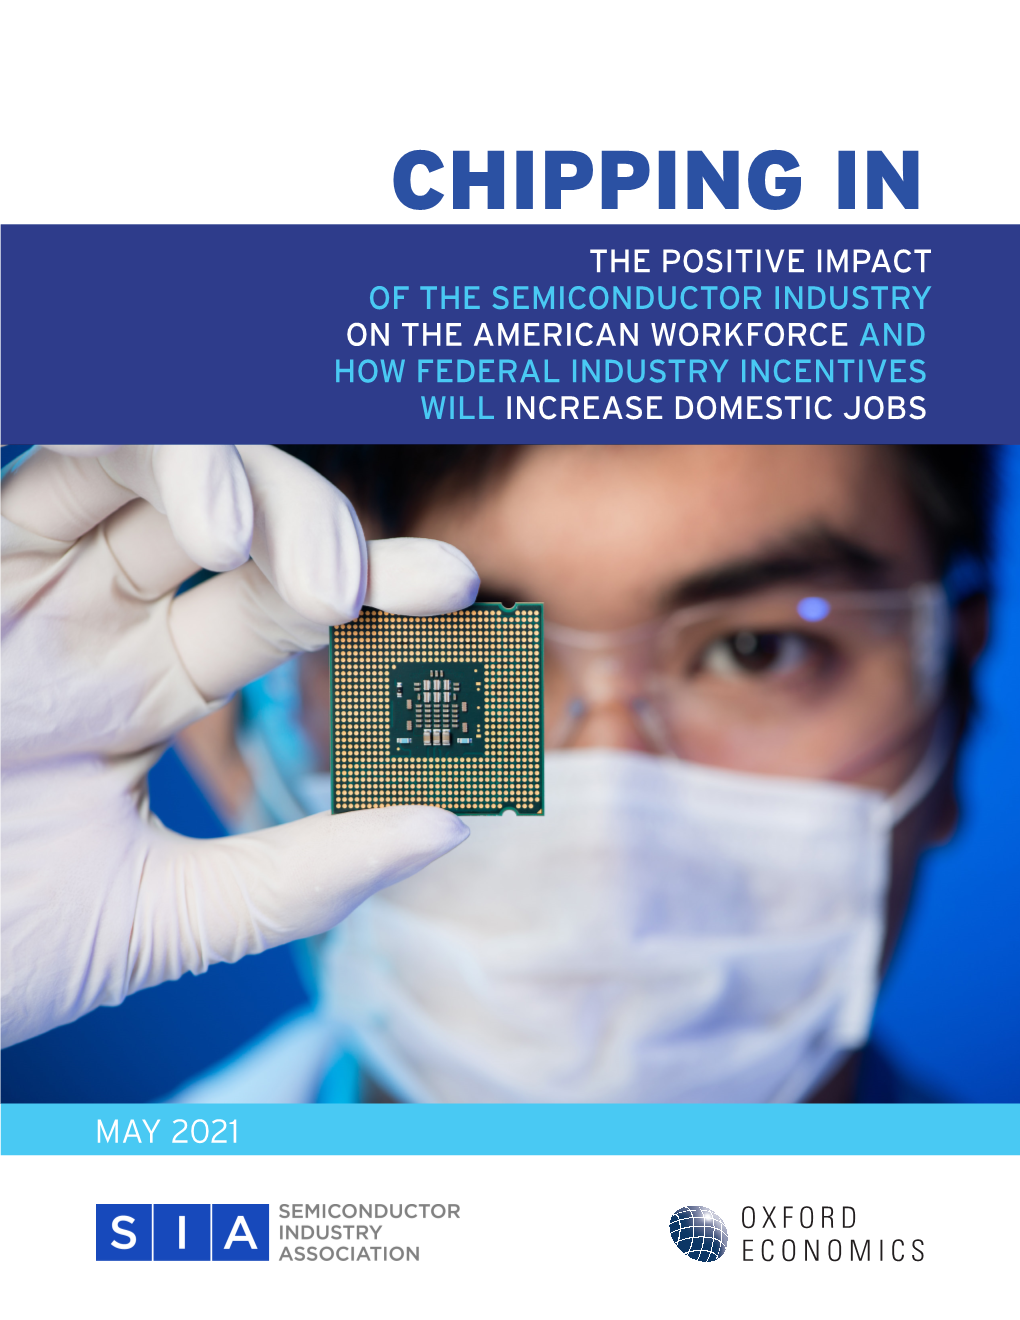 Chipping in the Positive Impact of the Semiconductor Industry on the American Workforce and How Federal Industry Incentives Will Increase Domestic Jobs